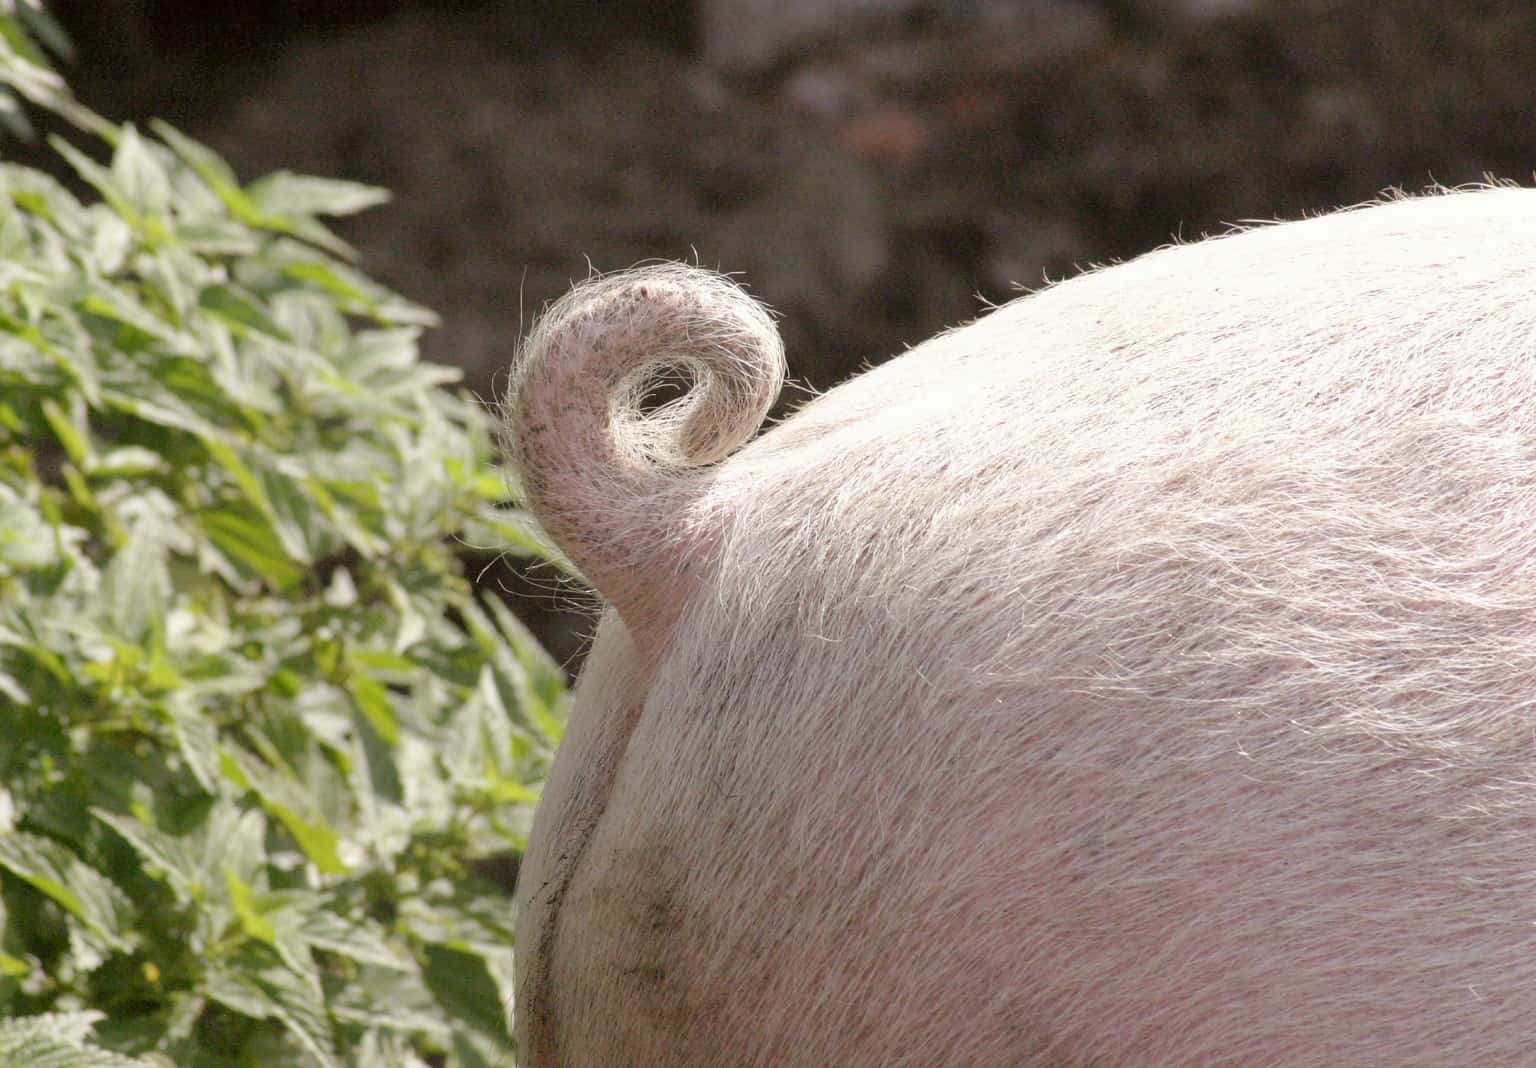 So, Why Do Pigs Have Tails, Anyway?